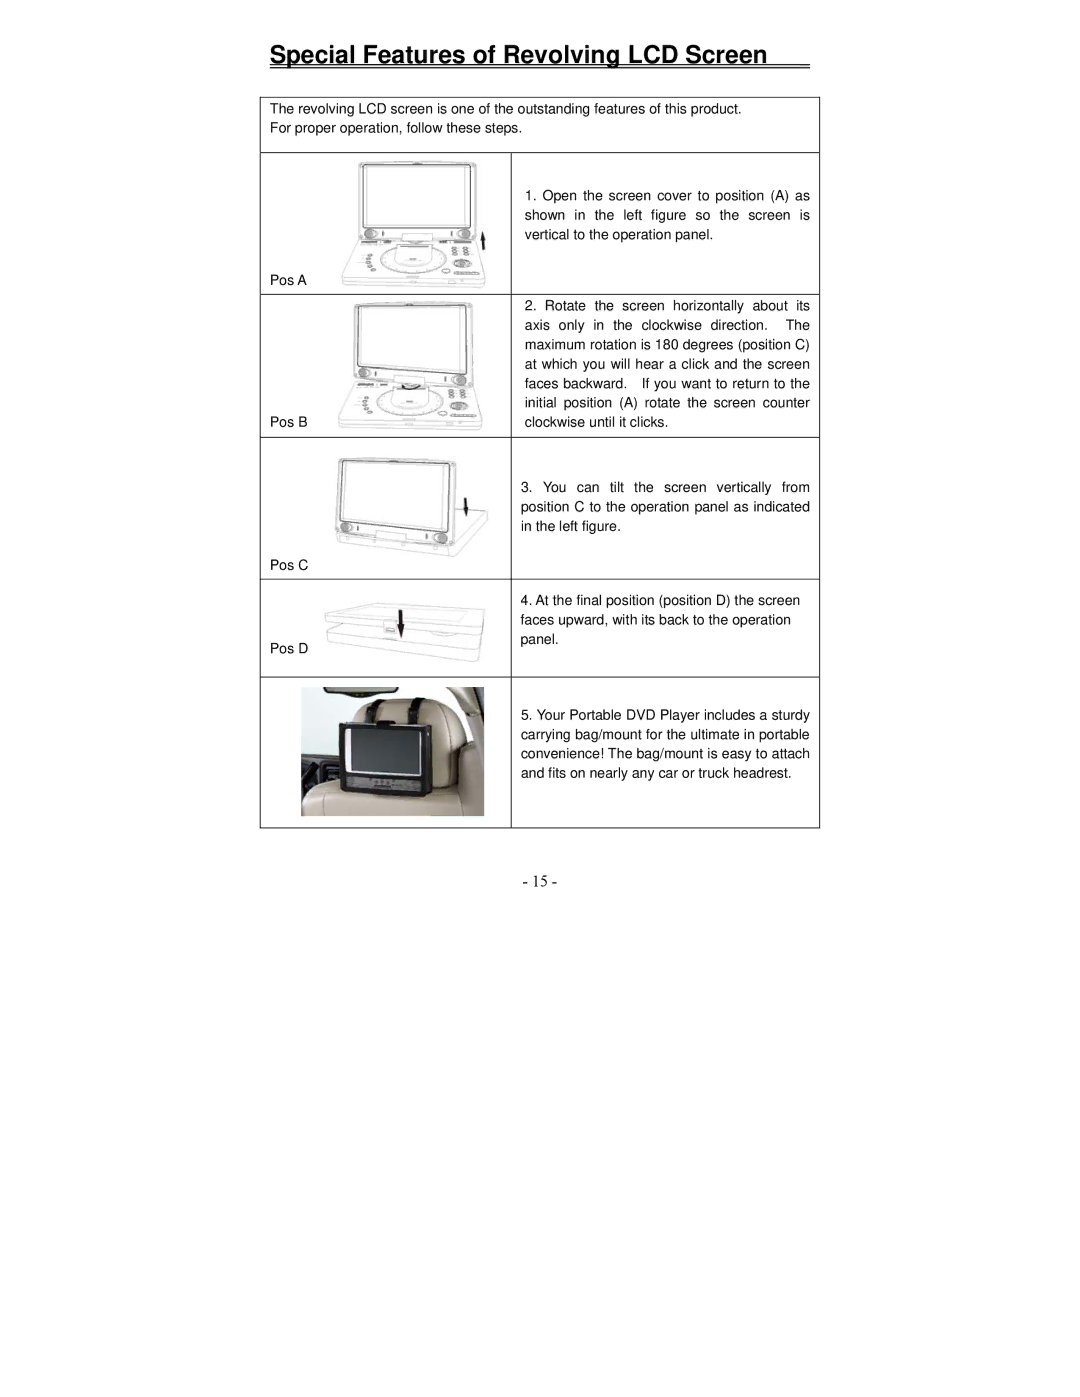 Polaroid PDV-1002A manual Special Features of Revolving LCD Screen 